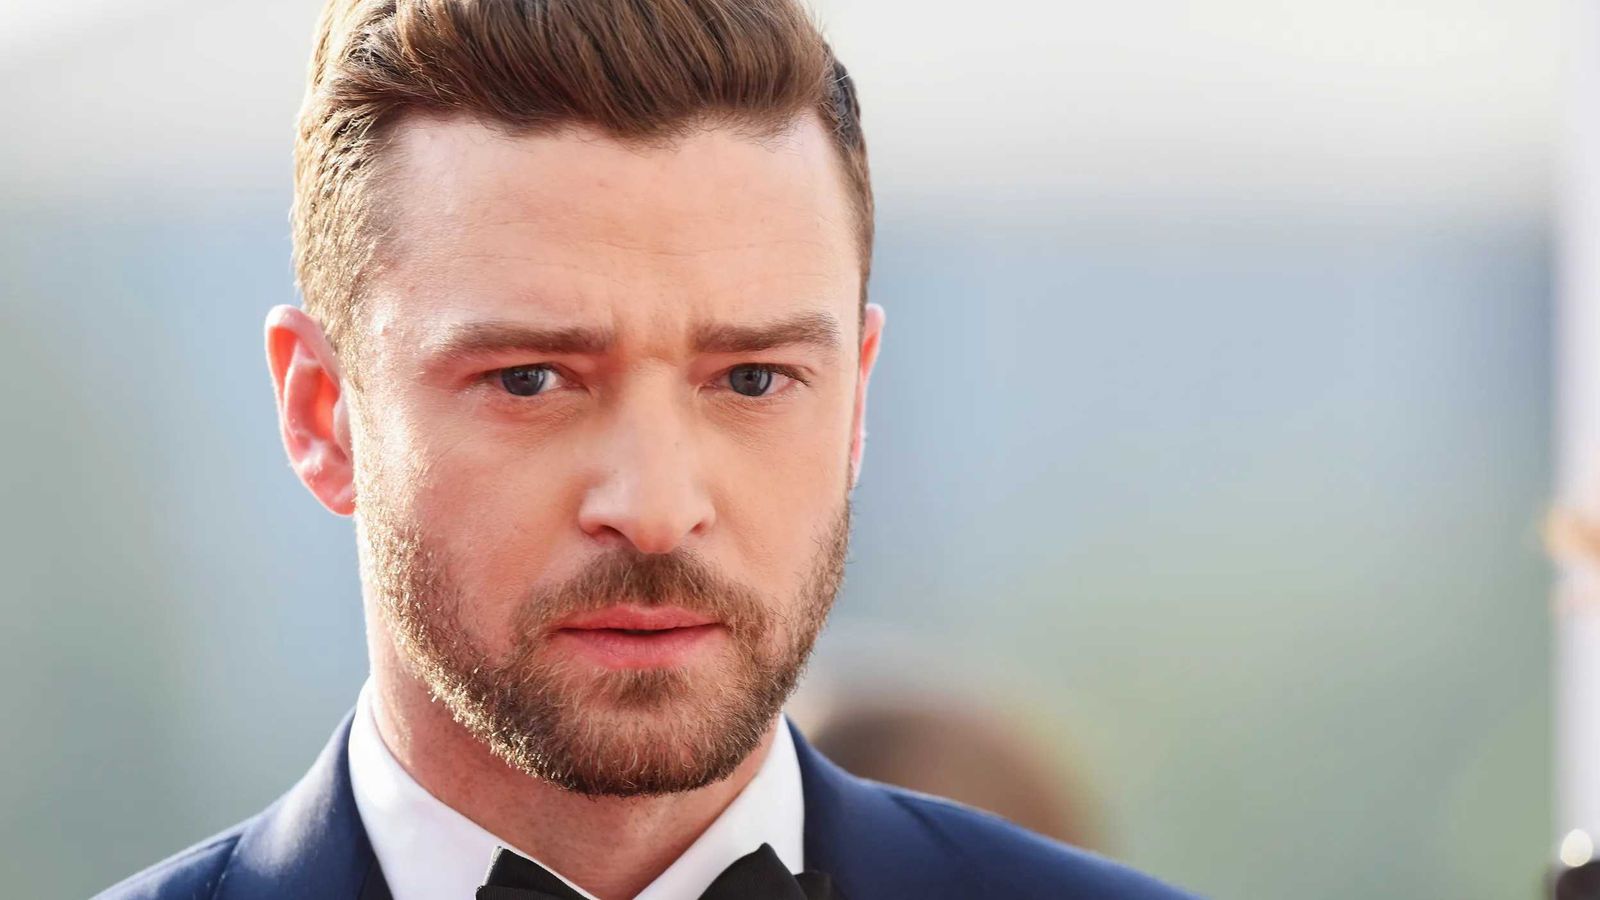 Justin Timberlake's heartfelt father's day message: 'Being a dad is the best thing in my life'